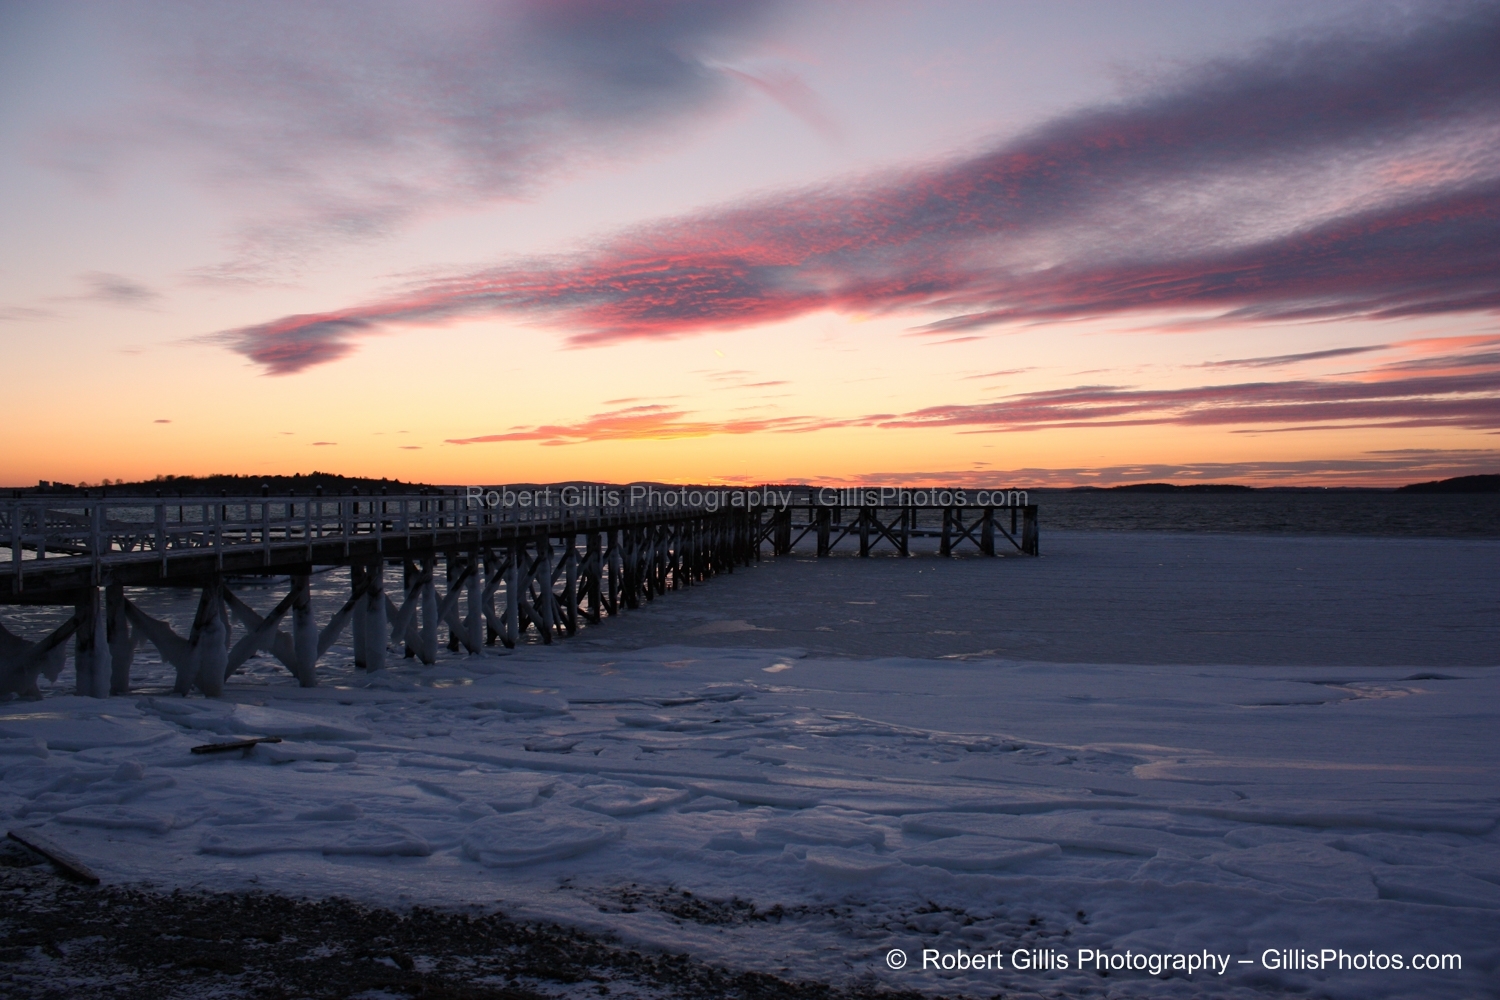 25 Hull - Nantasket - Sunset at Snow and Ice Covered A Street Dock